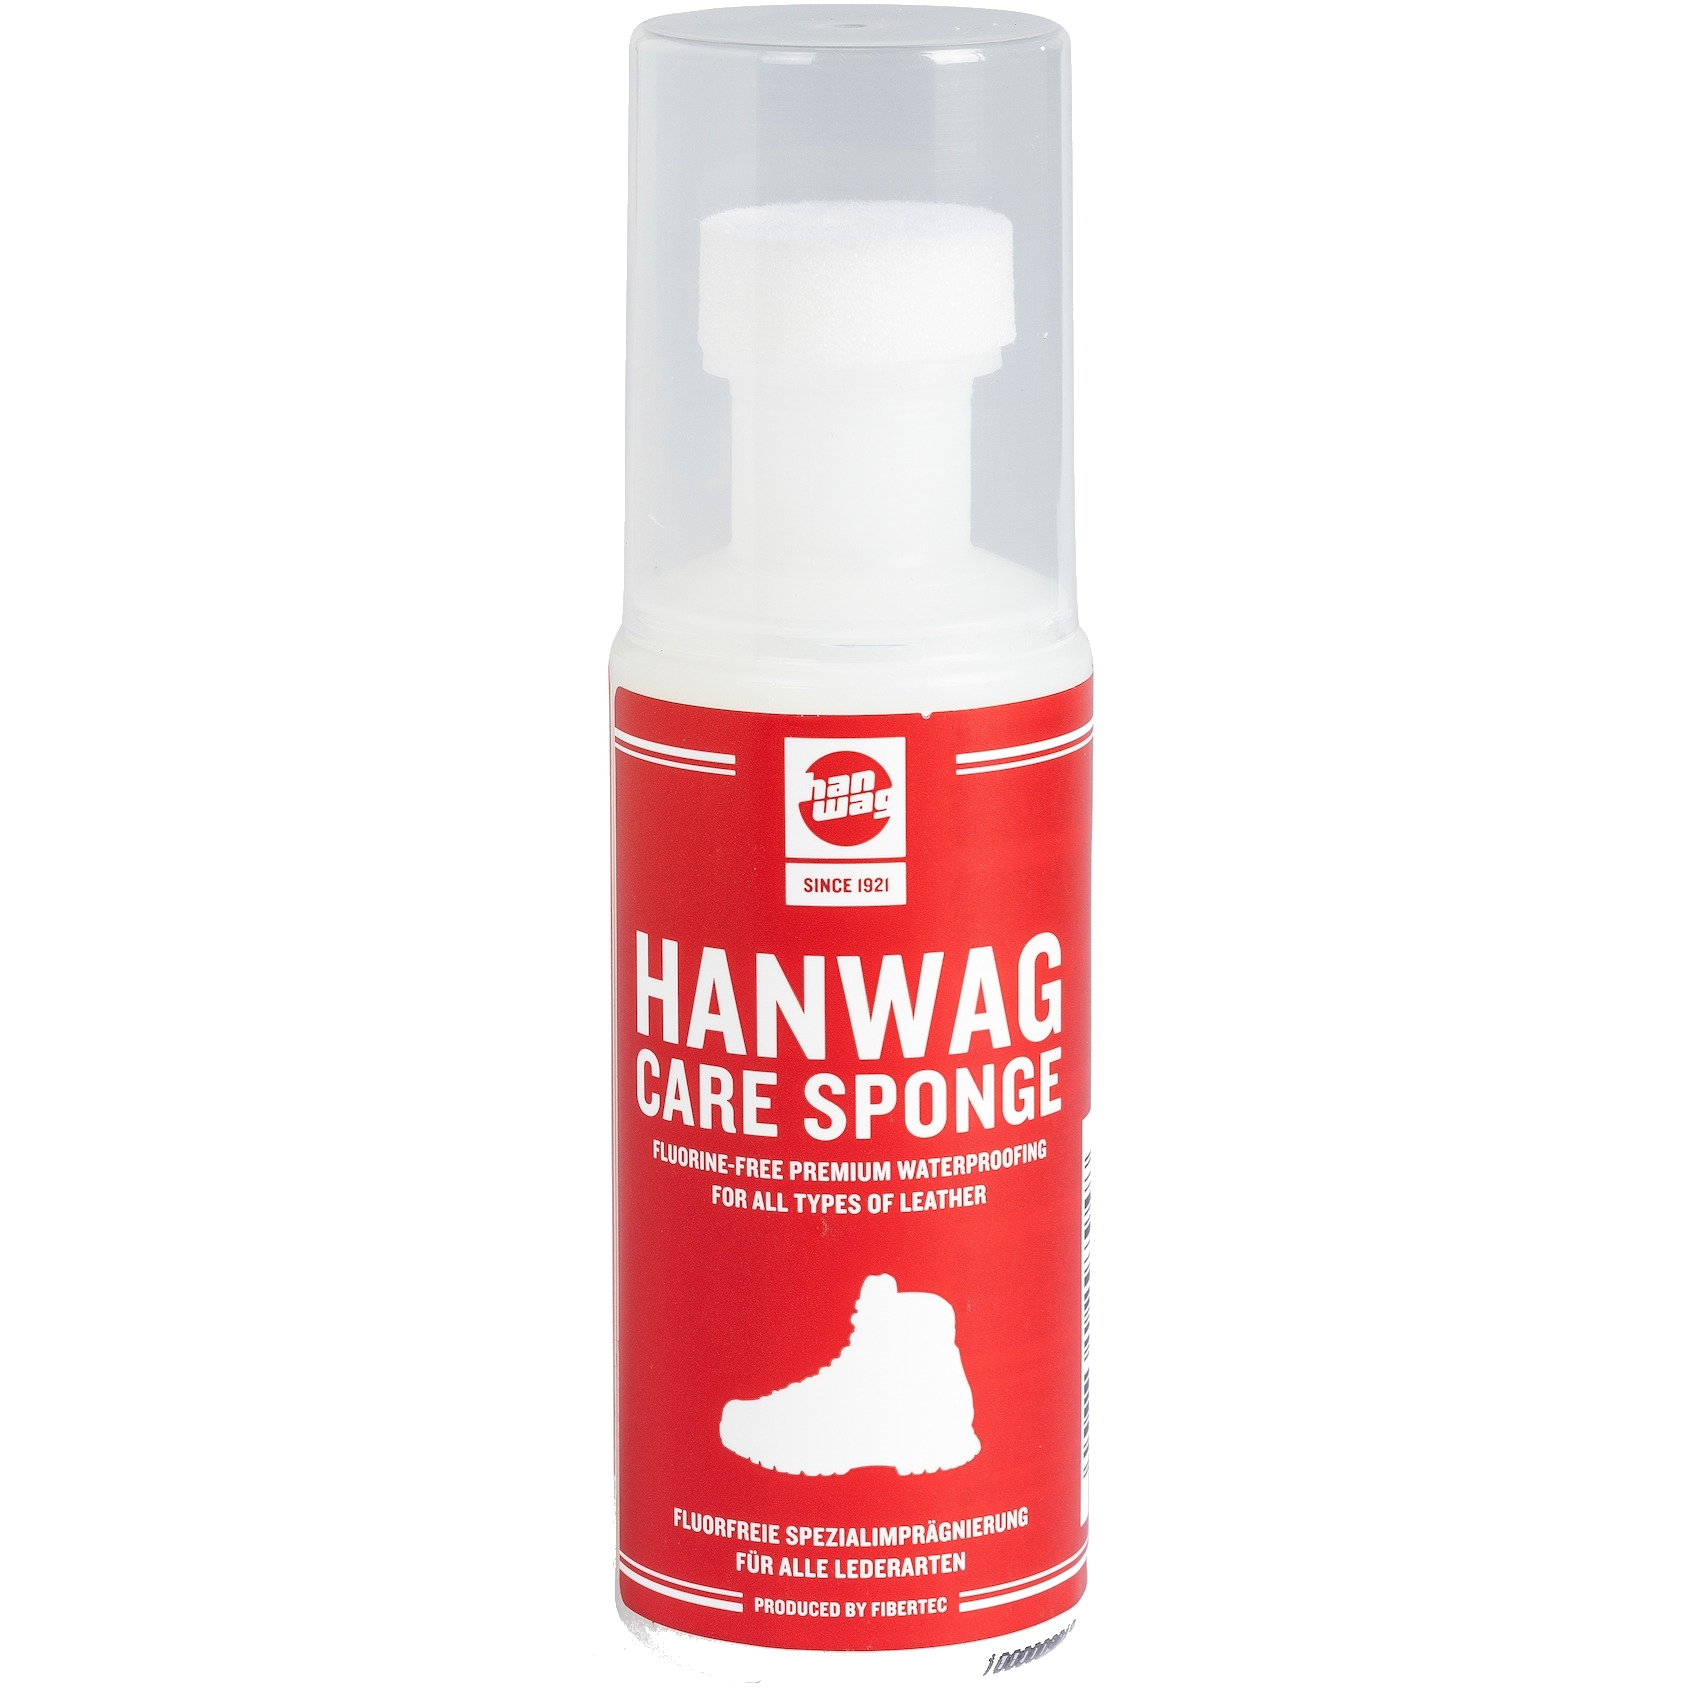 Image of Hanwag Care Sponge Impregnation And Leather Treatment 100ml